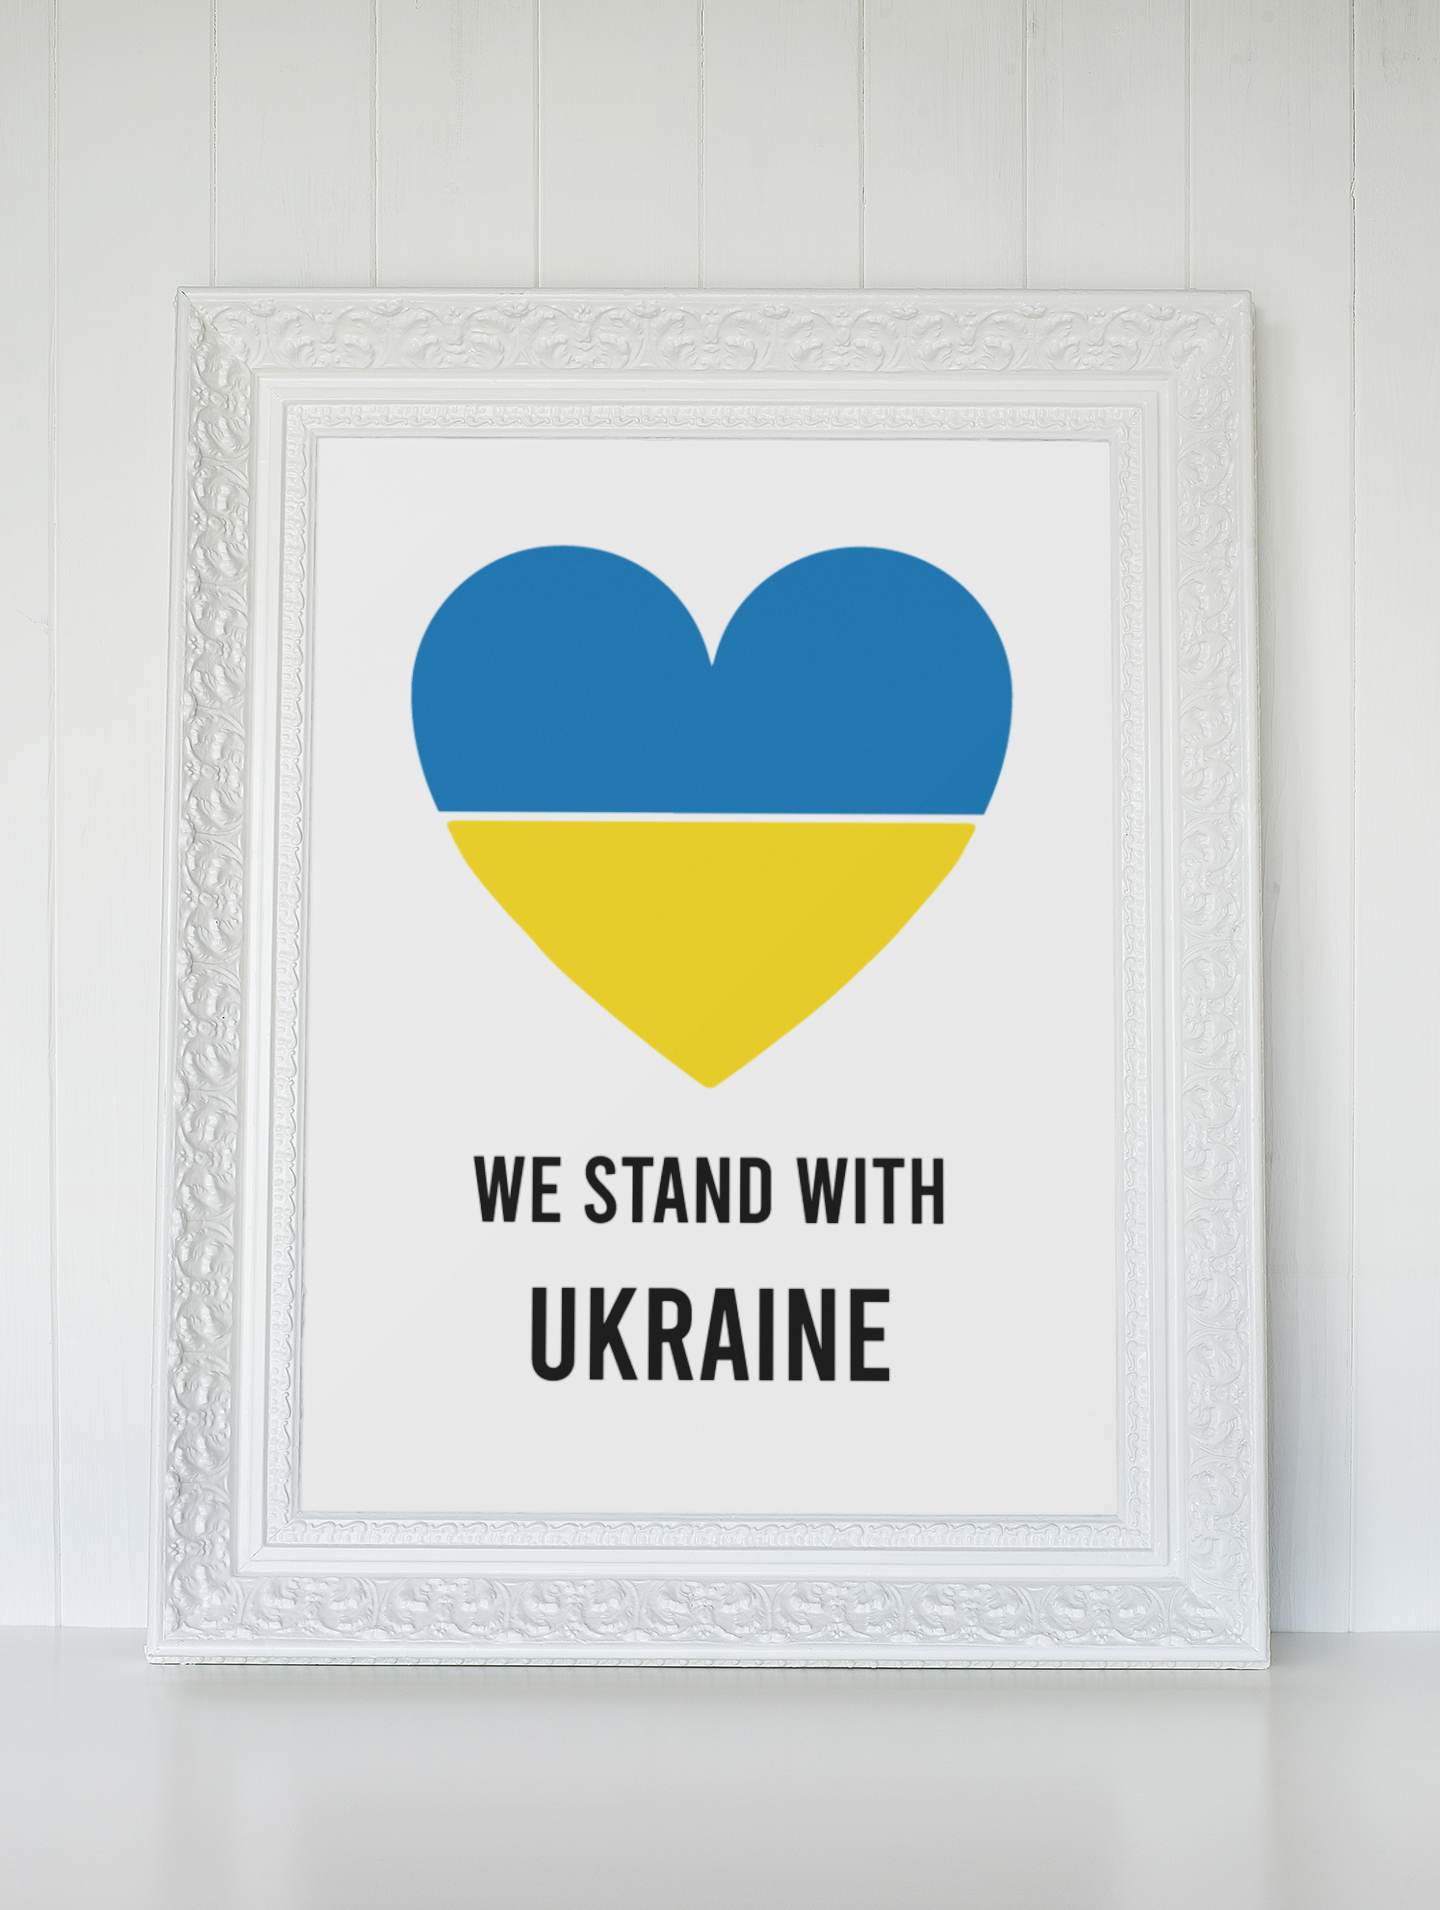 We Stand With Ukraine Heart Flag Print Room Wall Decor A4 Print - Donation To Ukraine Humanitarian Appeal